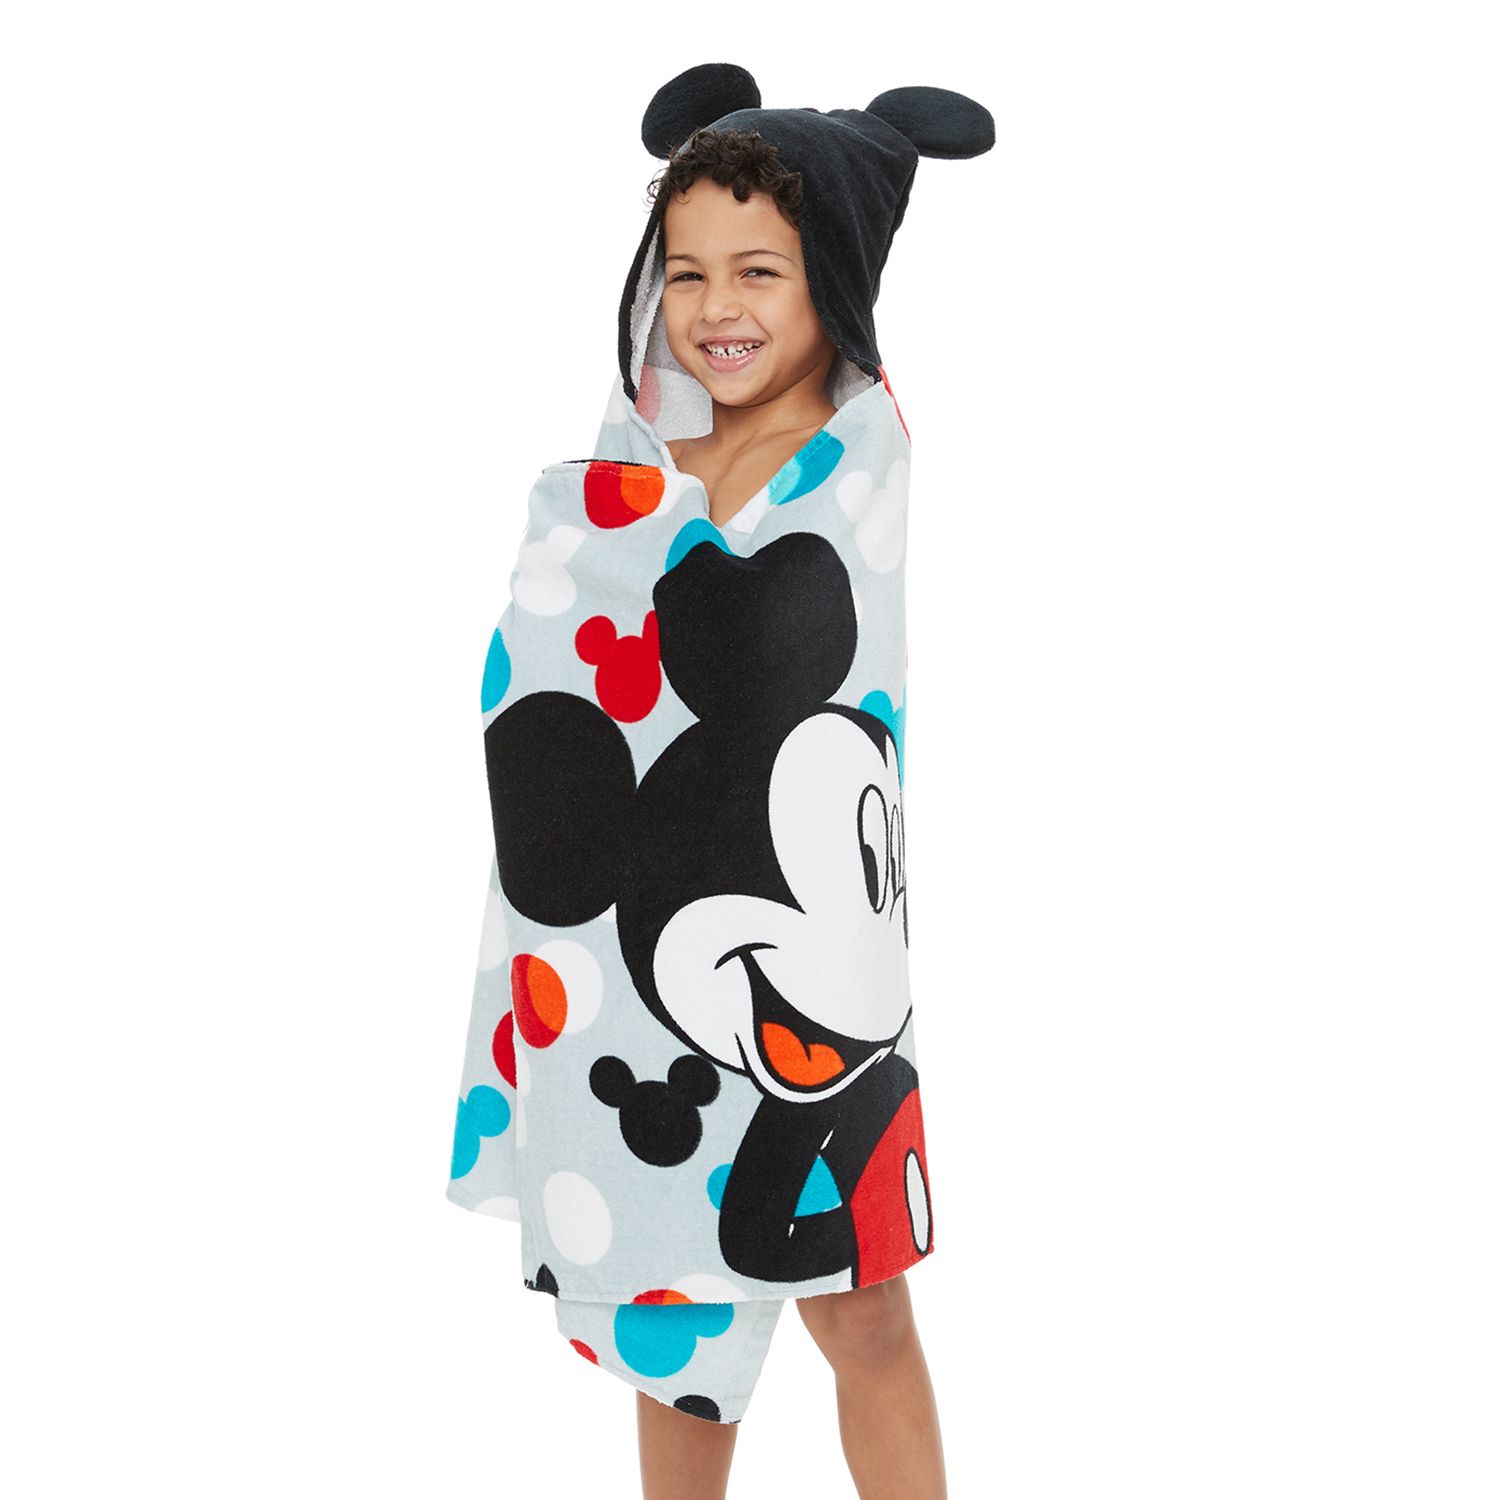 Image for Disney / The Big One Disney's The Big One Mickey Mouse Hooded Towel at Kohl's.